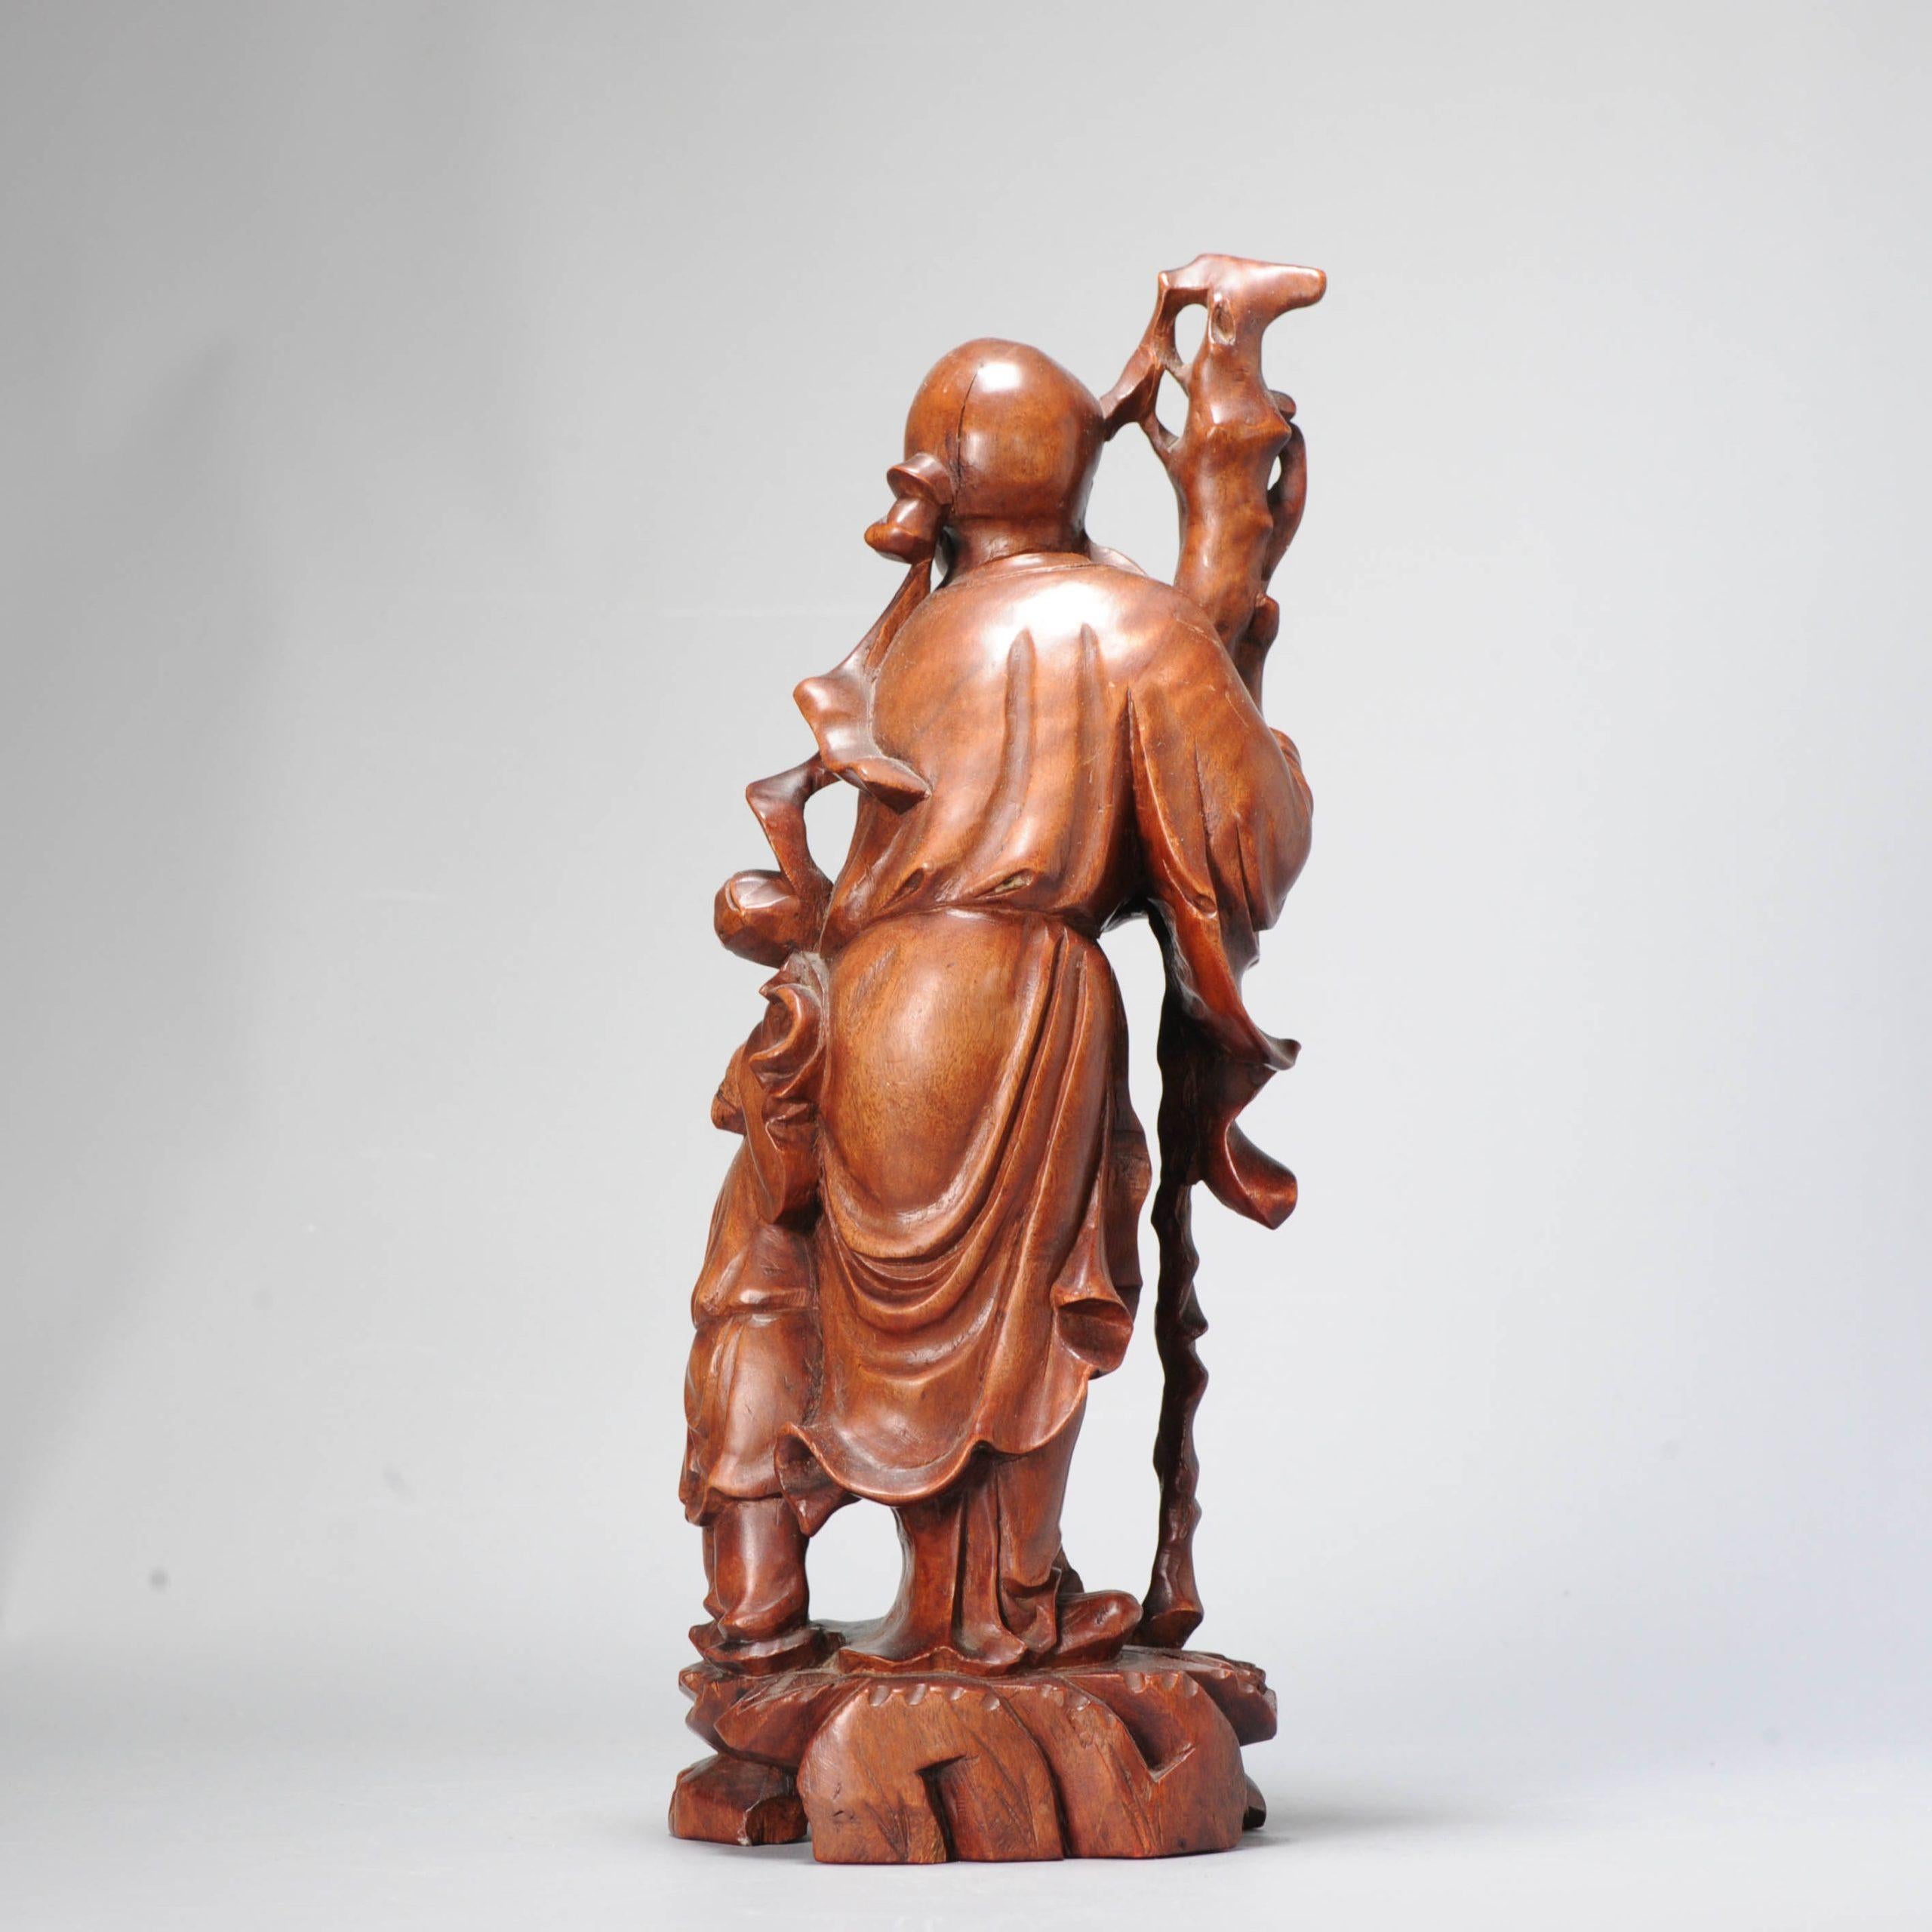 Large and beautifully hand carved.

Marked at the foot.

Additional information:
Material: Wood / Bamboo
Region of Origin: China
Period: 19th century, 20th century Qing (1661 - 1912)
Condition: Usual small age signs like small cracks, nothing